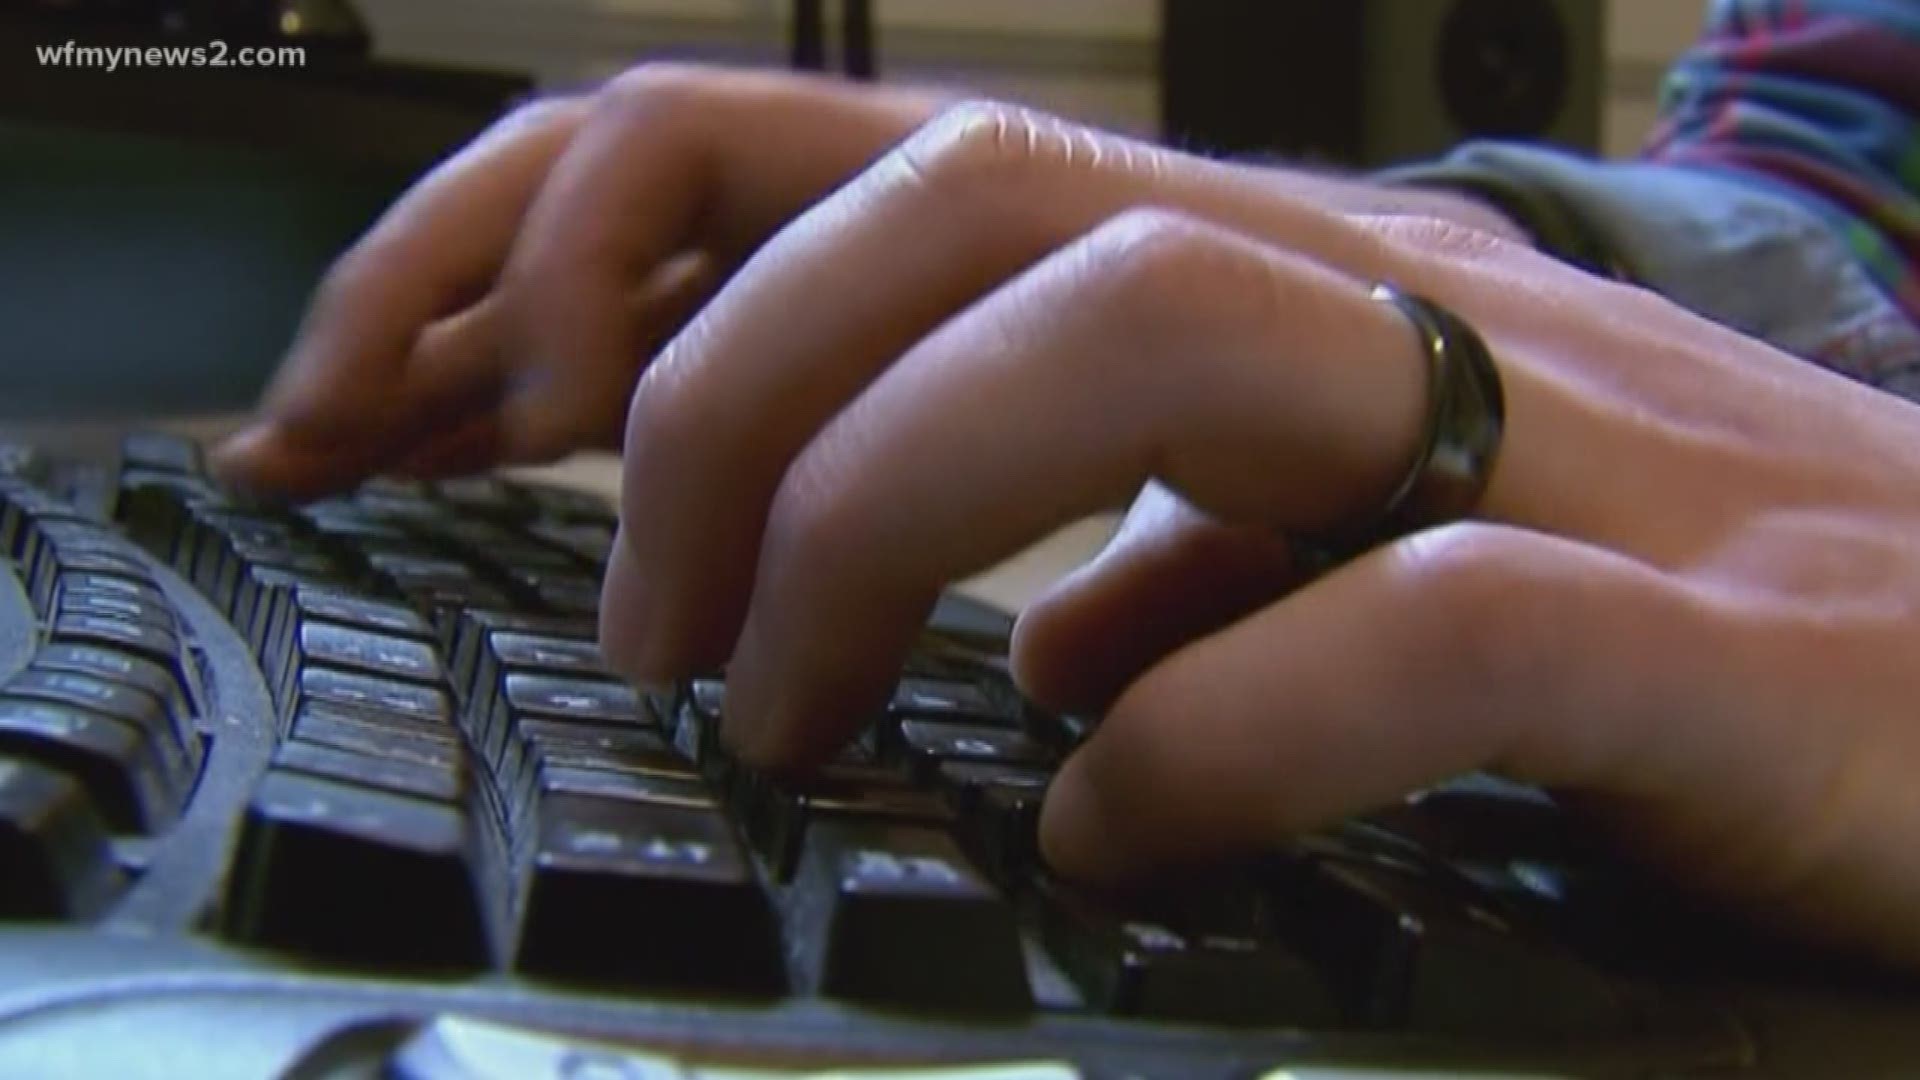 Cyber Monday: Be On The Lookout For Hackers And Scams